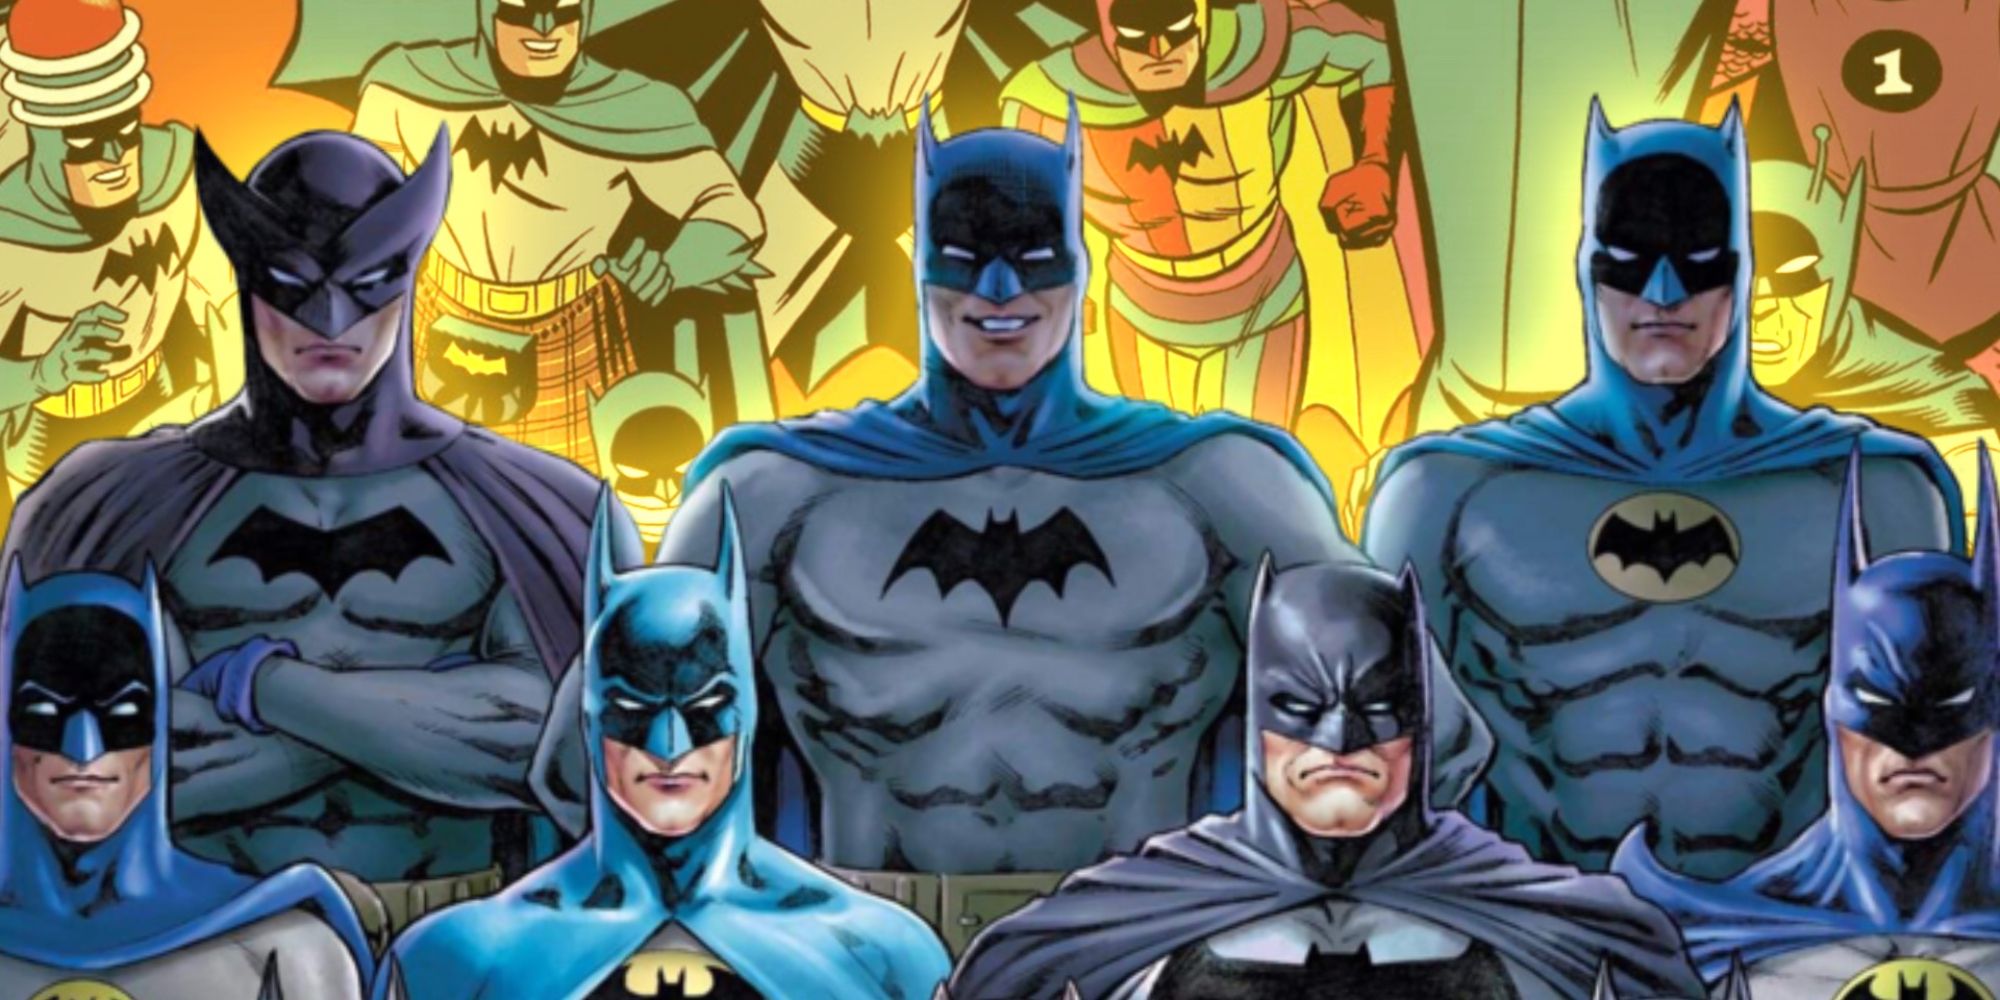 10 Facts You Need to Know About the JUSTICE LEAGUE OF AMERICA